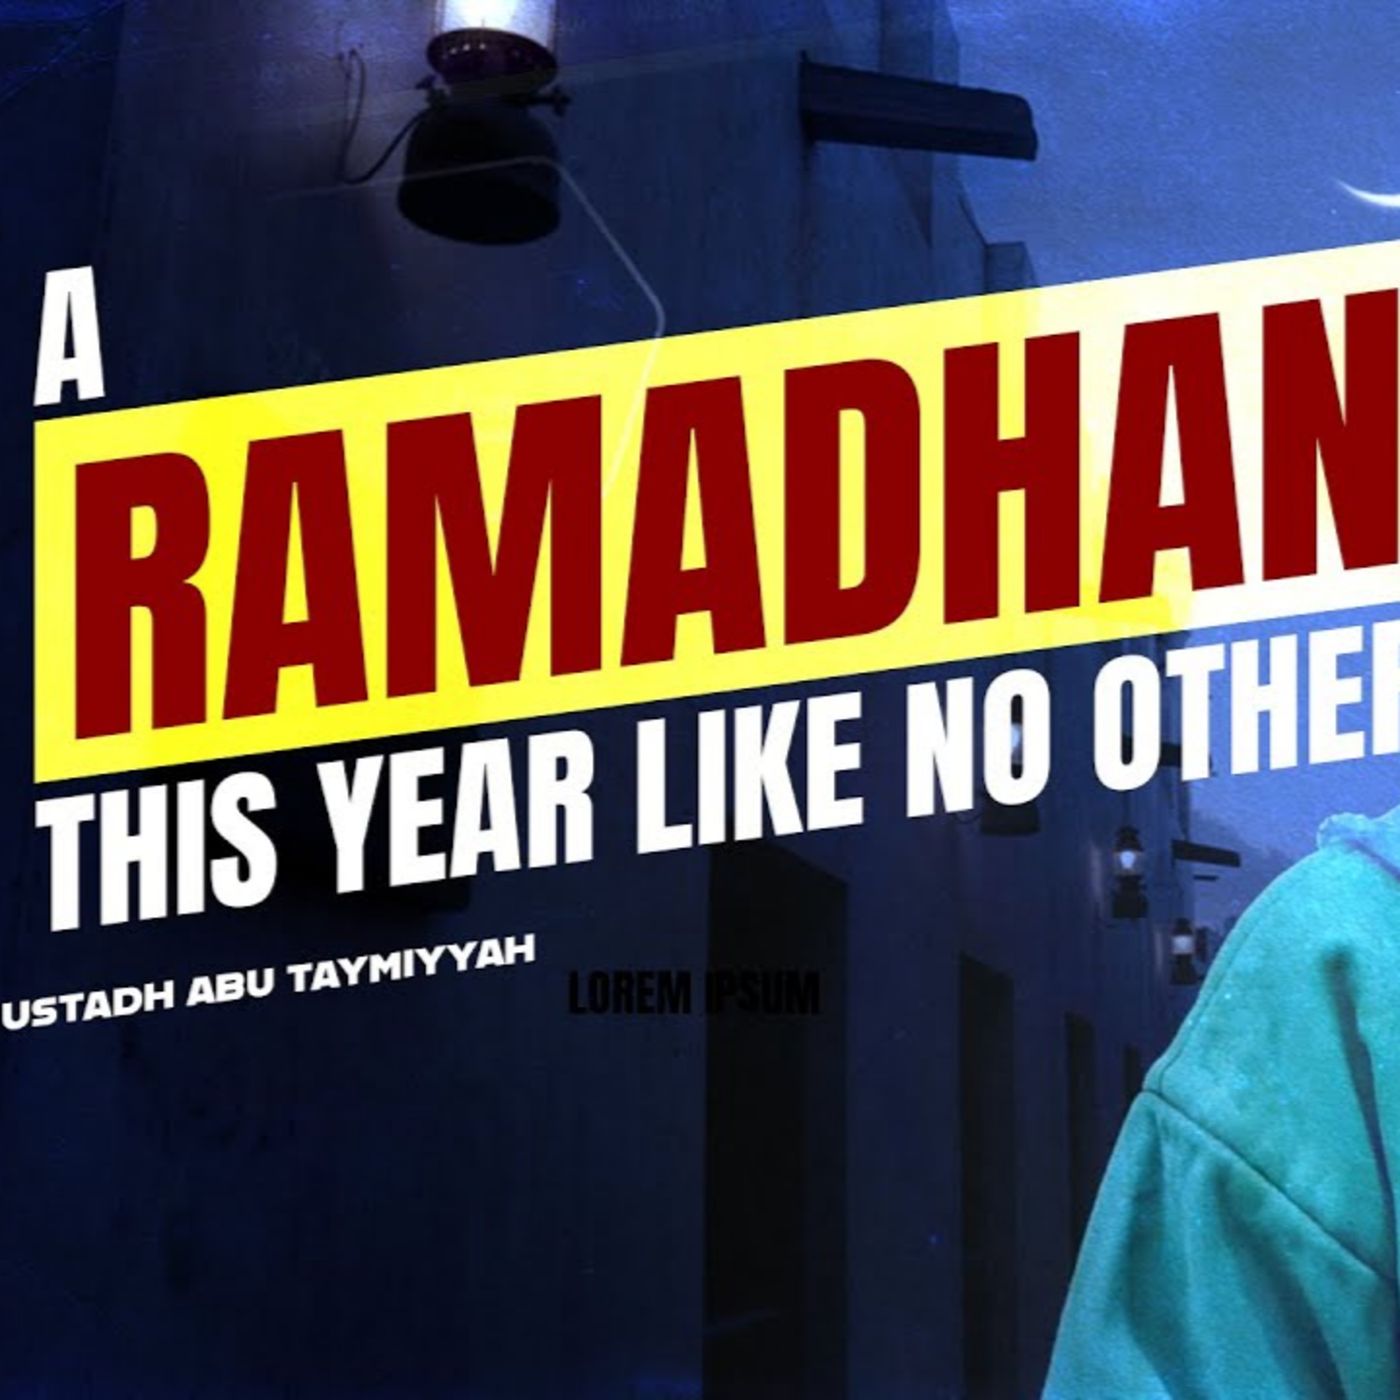 A Ramadhan This Year Like No Other